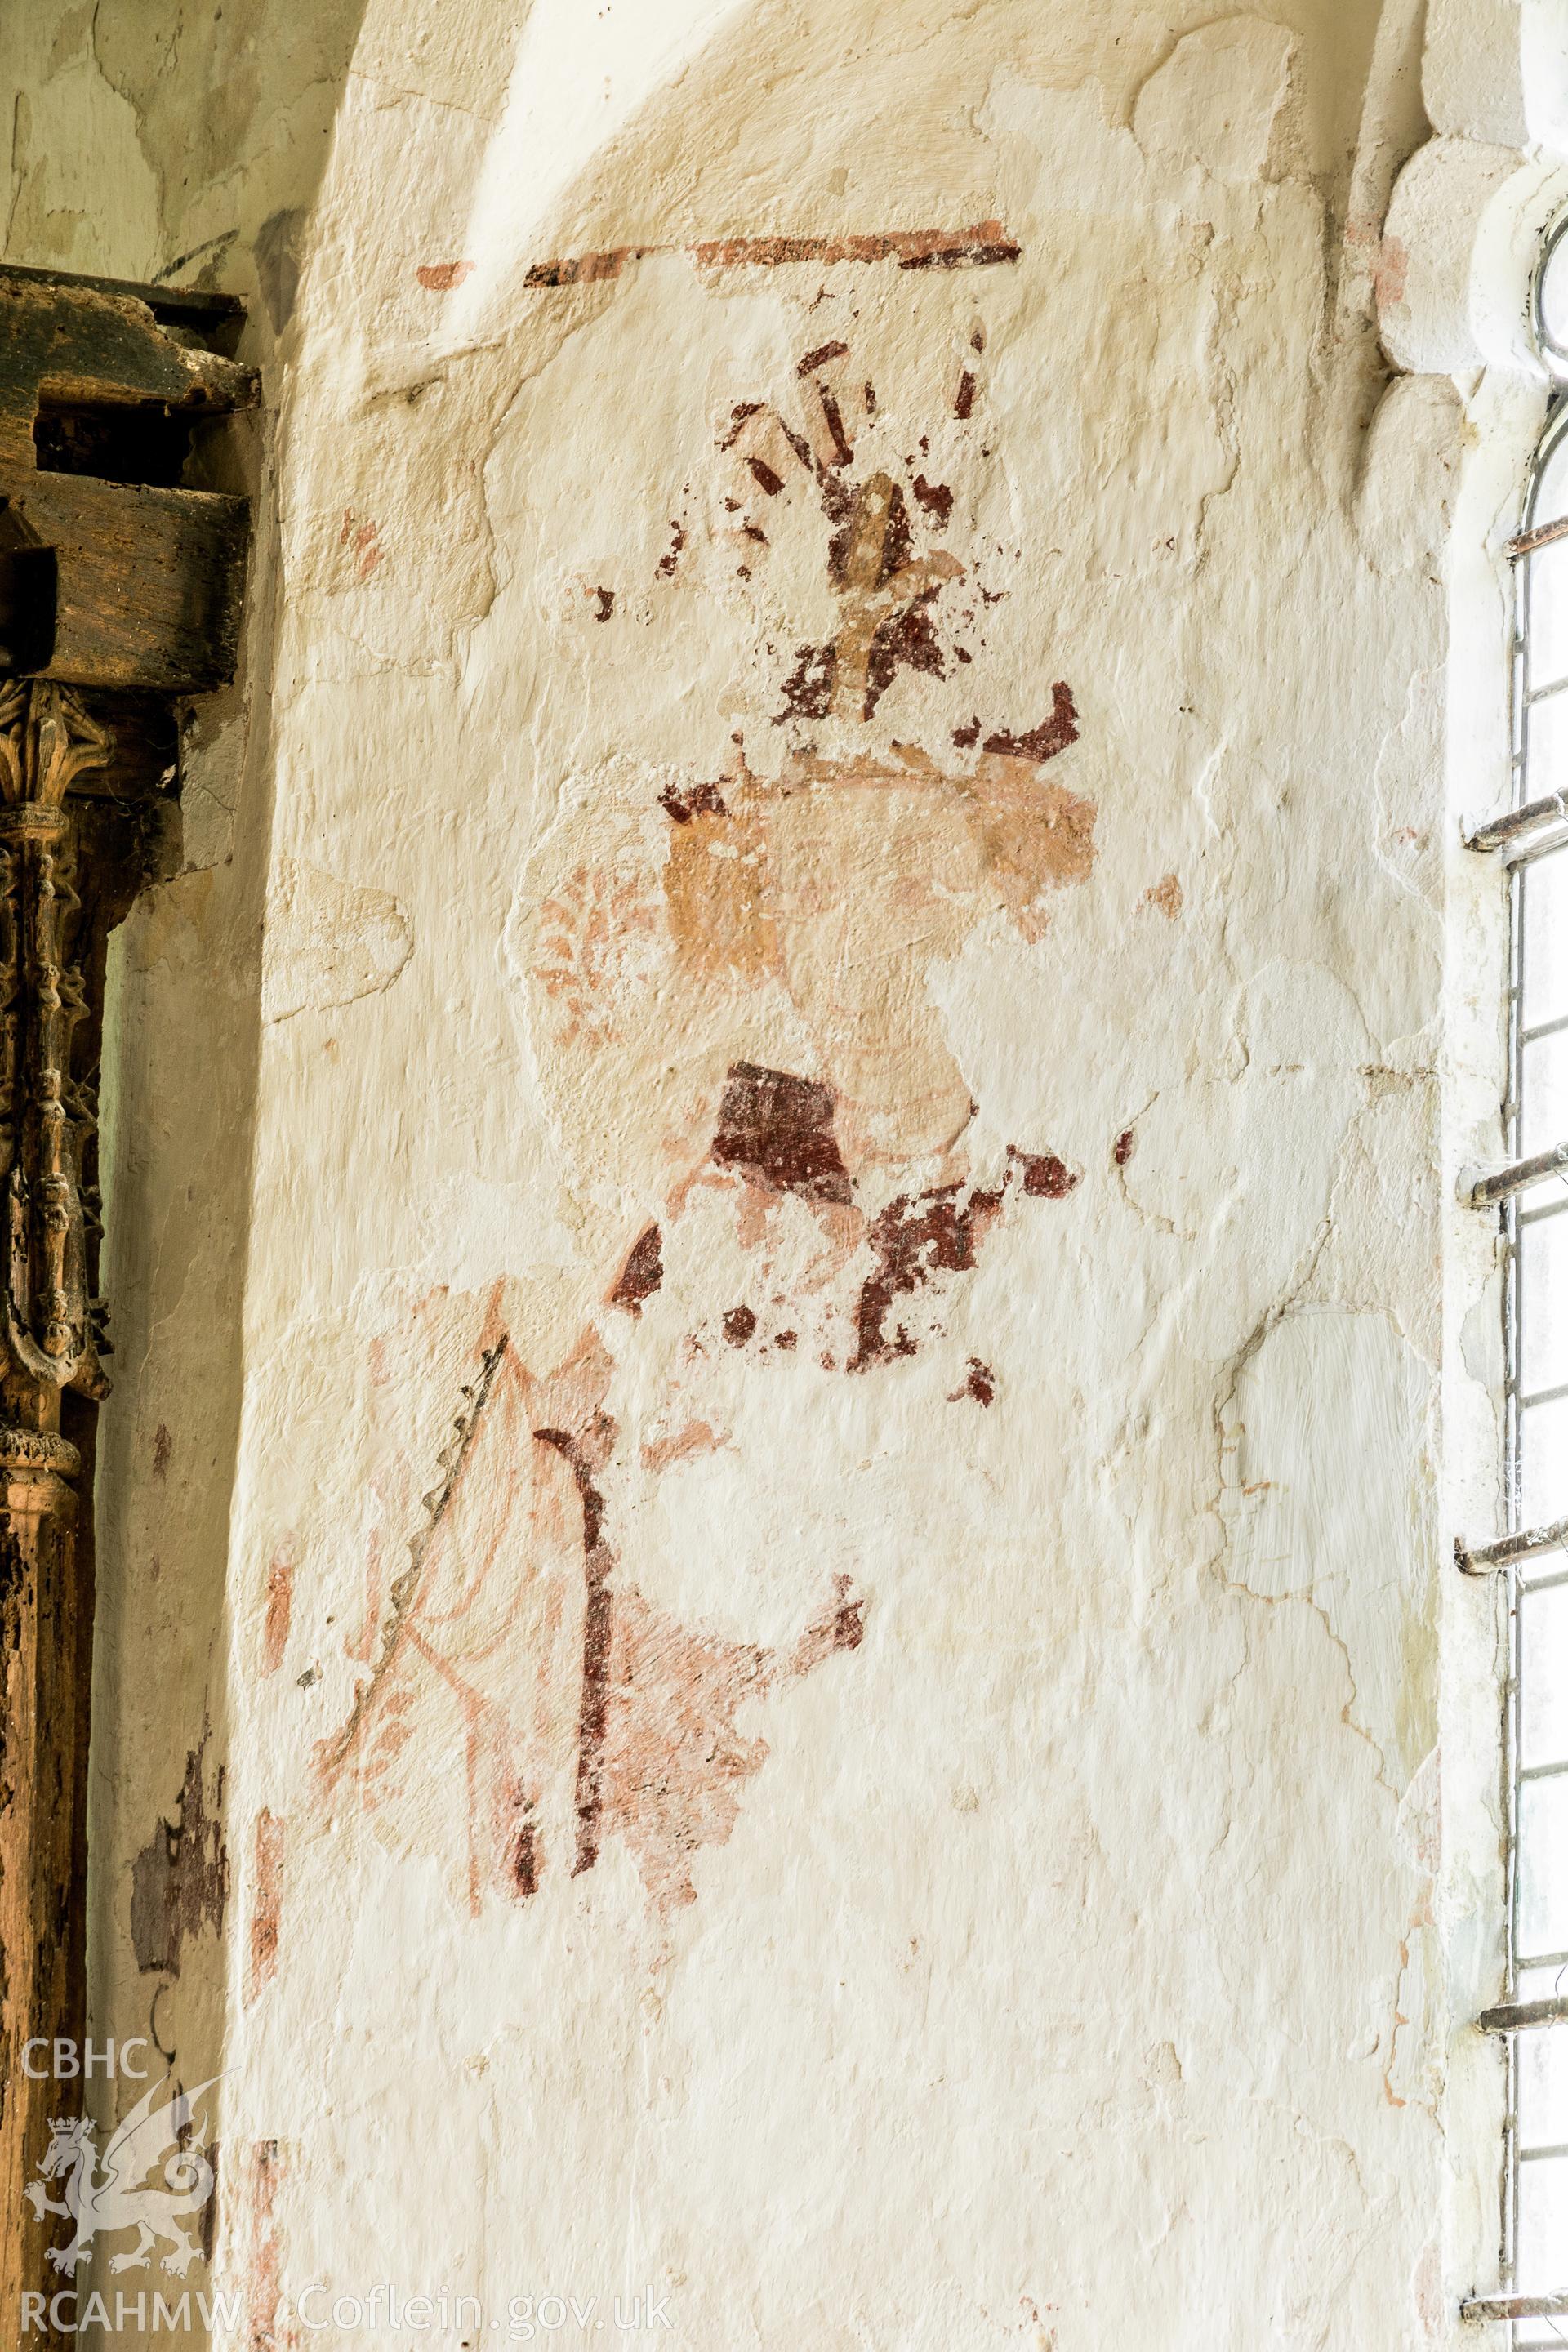 Wallpainting on window splay awaiting conservation at Cadoc’s Church,Llancarfan. RCAHMW photograph by Martin Crampin, 30 April 2021. As published in the RCAHMW volume, 'Temlau Peintiedig: Murluniau a Chroglenni yn Eglwysi Cymru, 1200–1800 / Painted Temples: Wallpaintings and Rood-screens in Welsh Churches, 1200–1800.' Figure 4.5a, page 153.